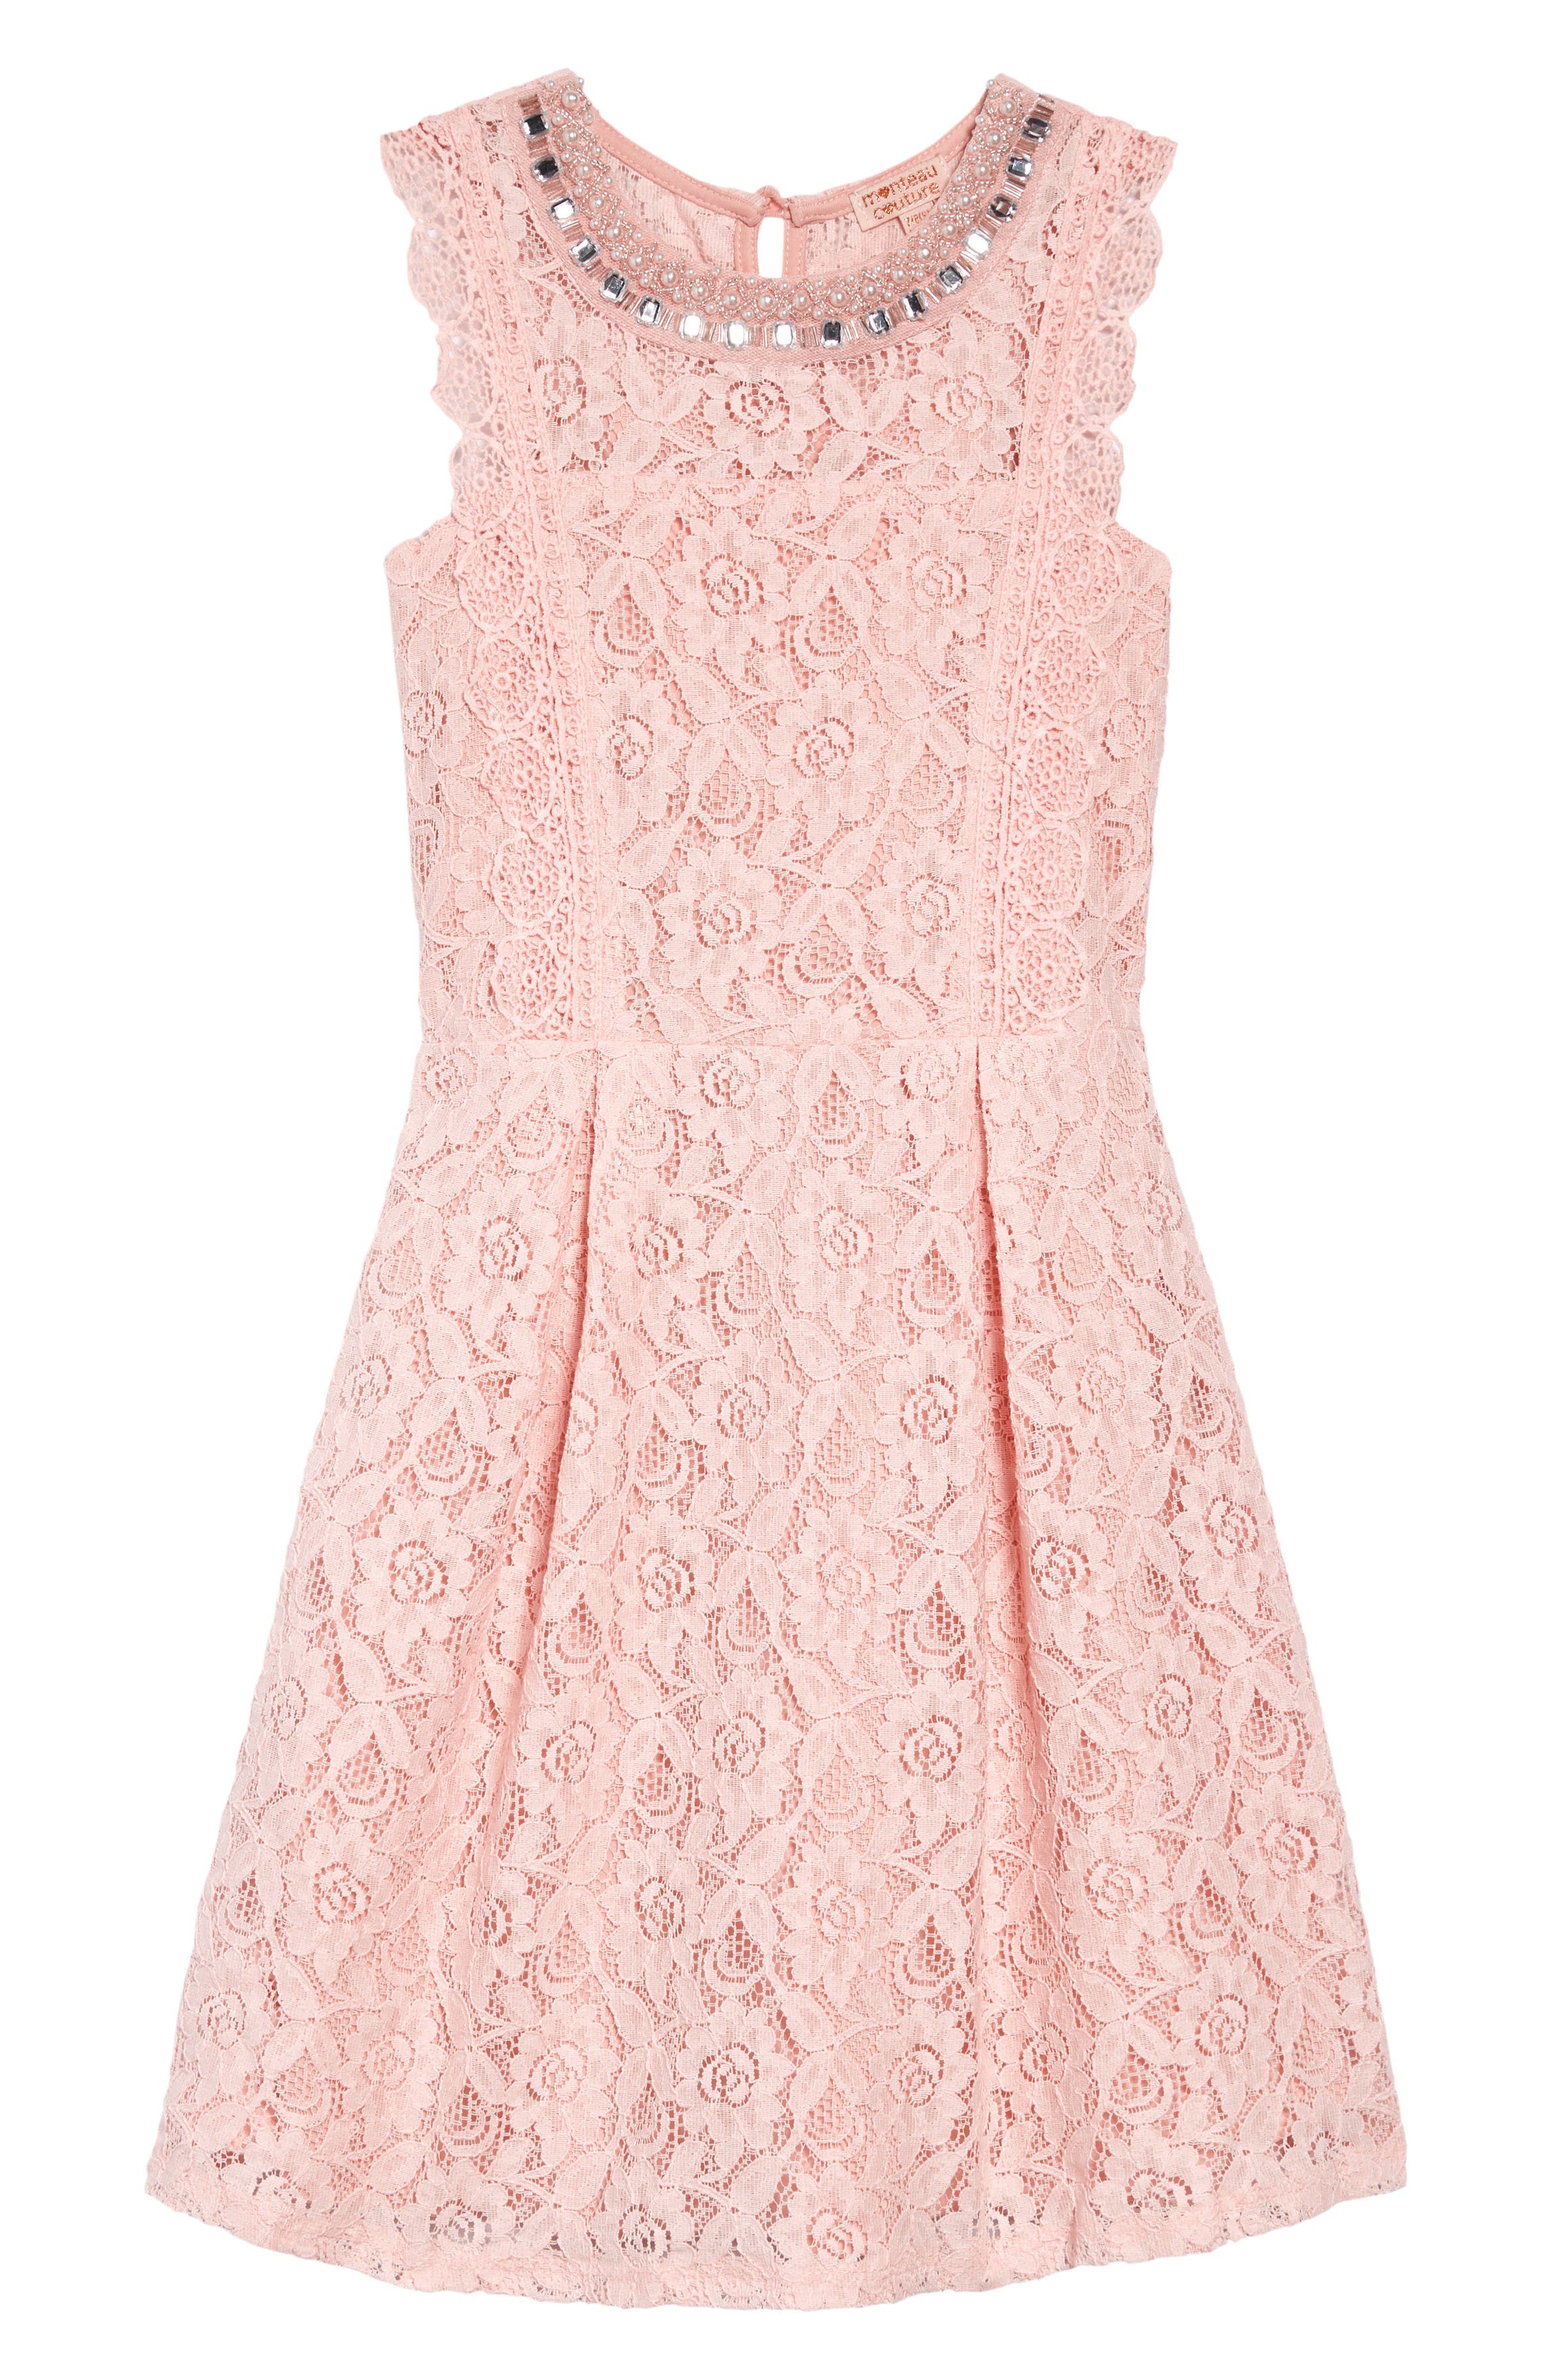 Monteau Couture Jeweled Neckline Lace Dress (Big Girls) | Nordstrom